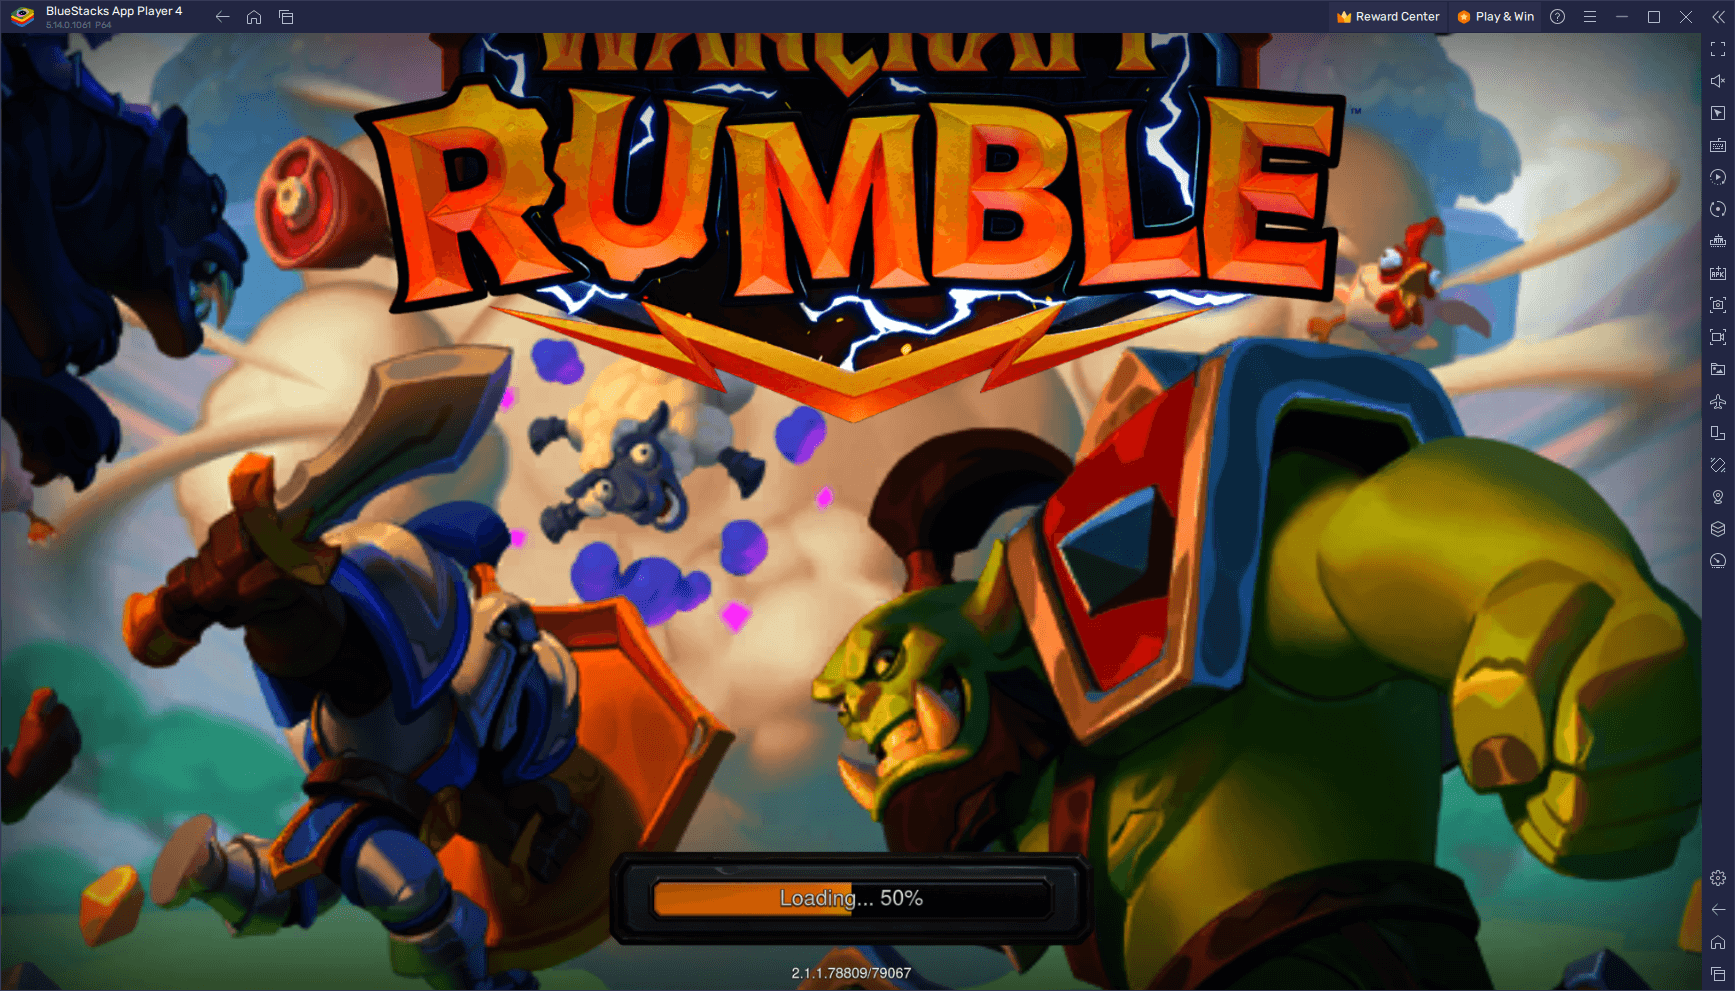 Warcraft Rumble 60 FPS Guide - Unlock Smooth Gaming on PC with BlueStacks